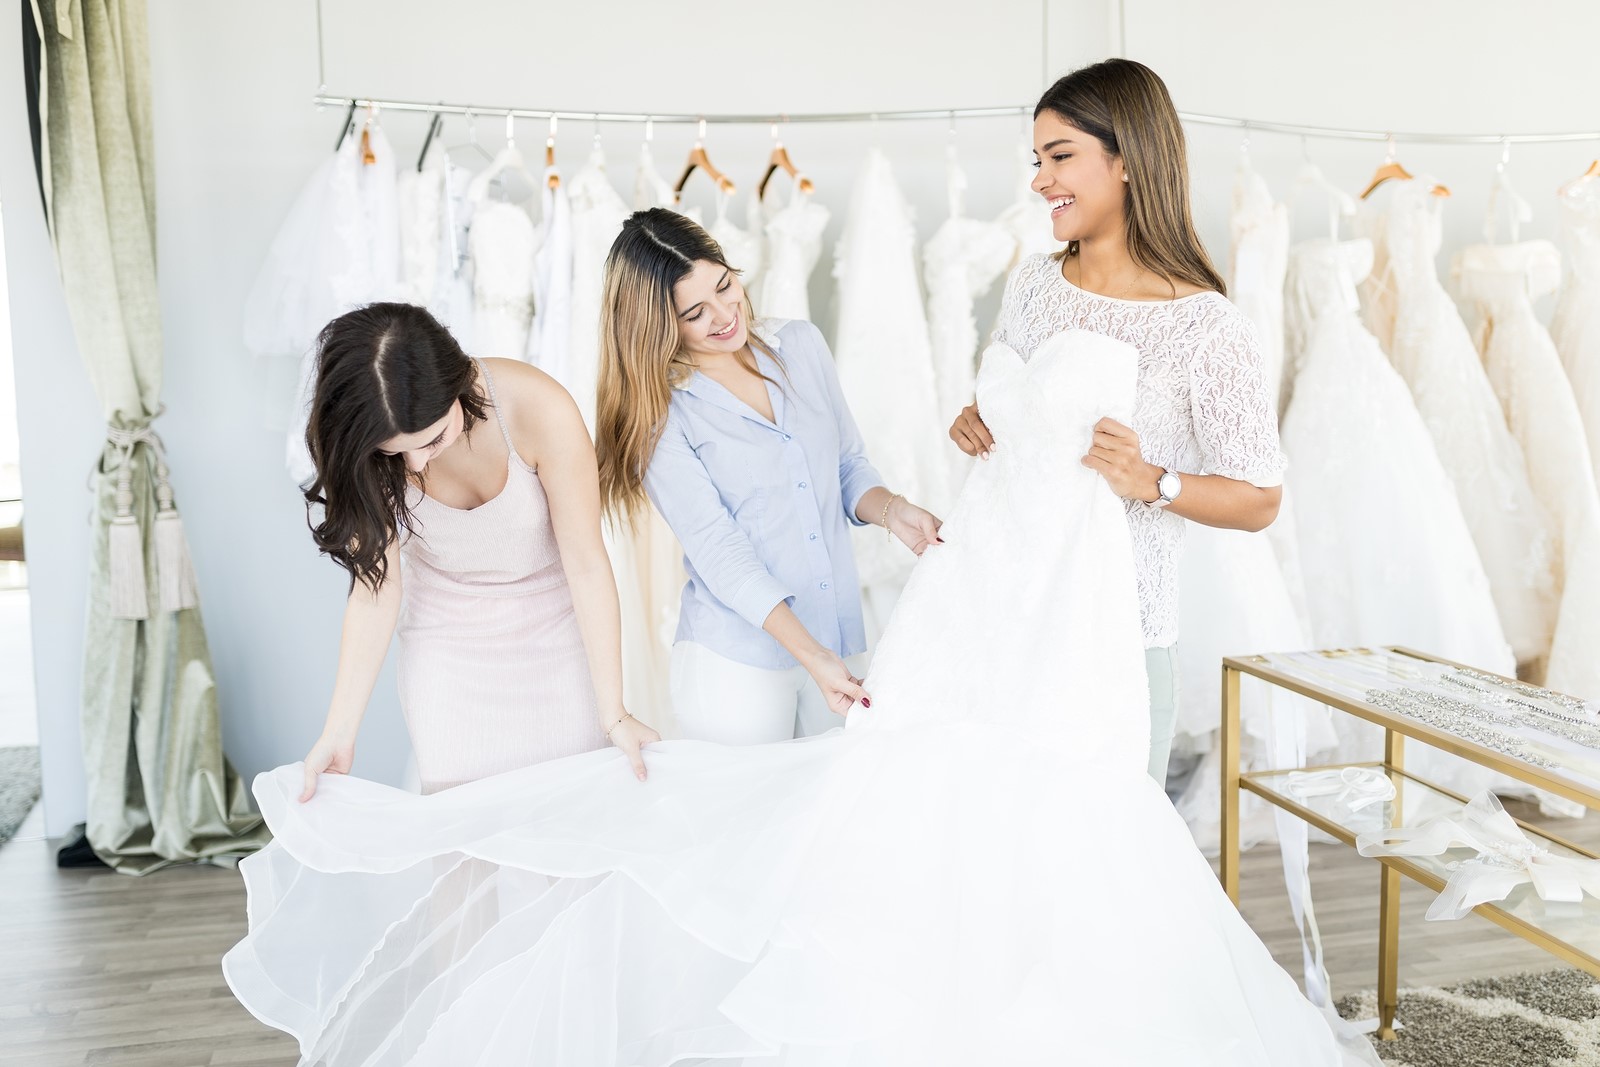 Wedding Gown Rental 101: All You Need to Know & More